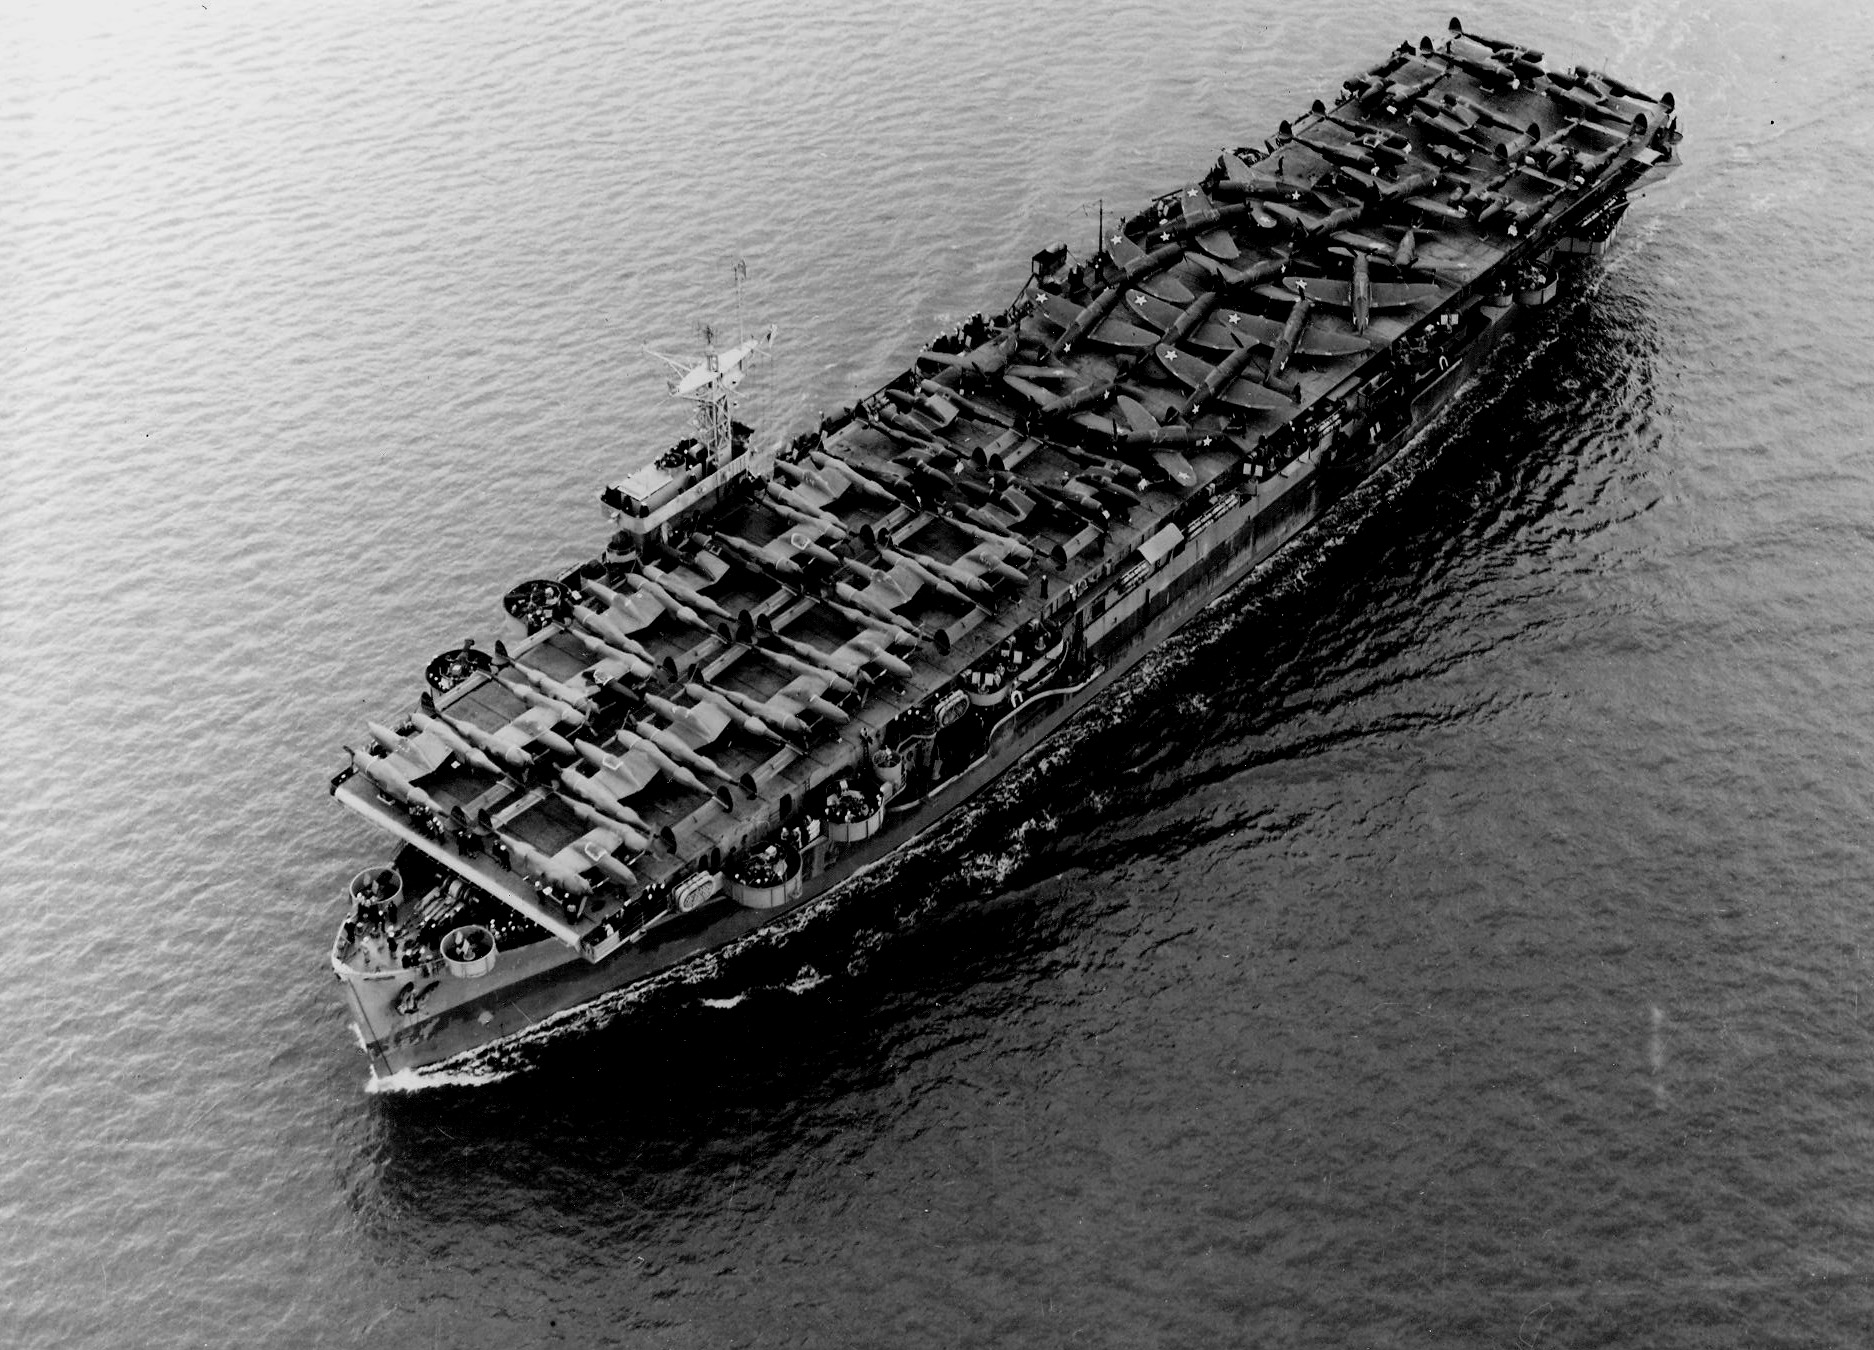 Escort Carrier USS Barnes transporting P-38 Lightning and P-47 Thunderbolt fighter planes across the Pacific, July 1 1943